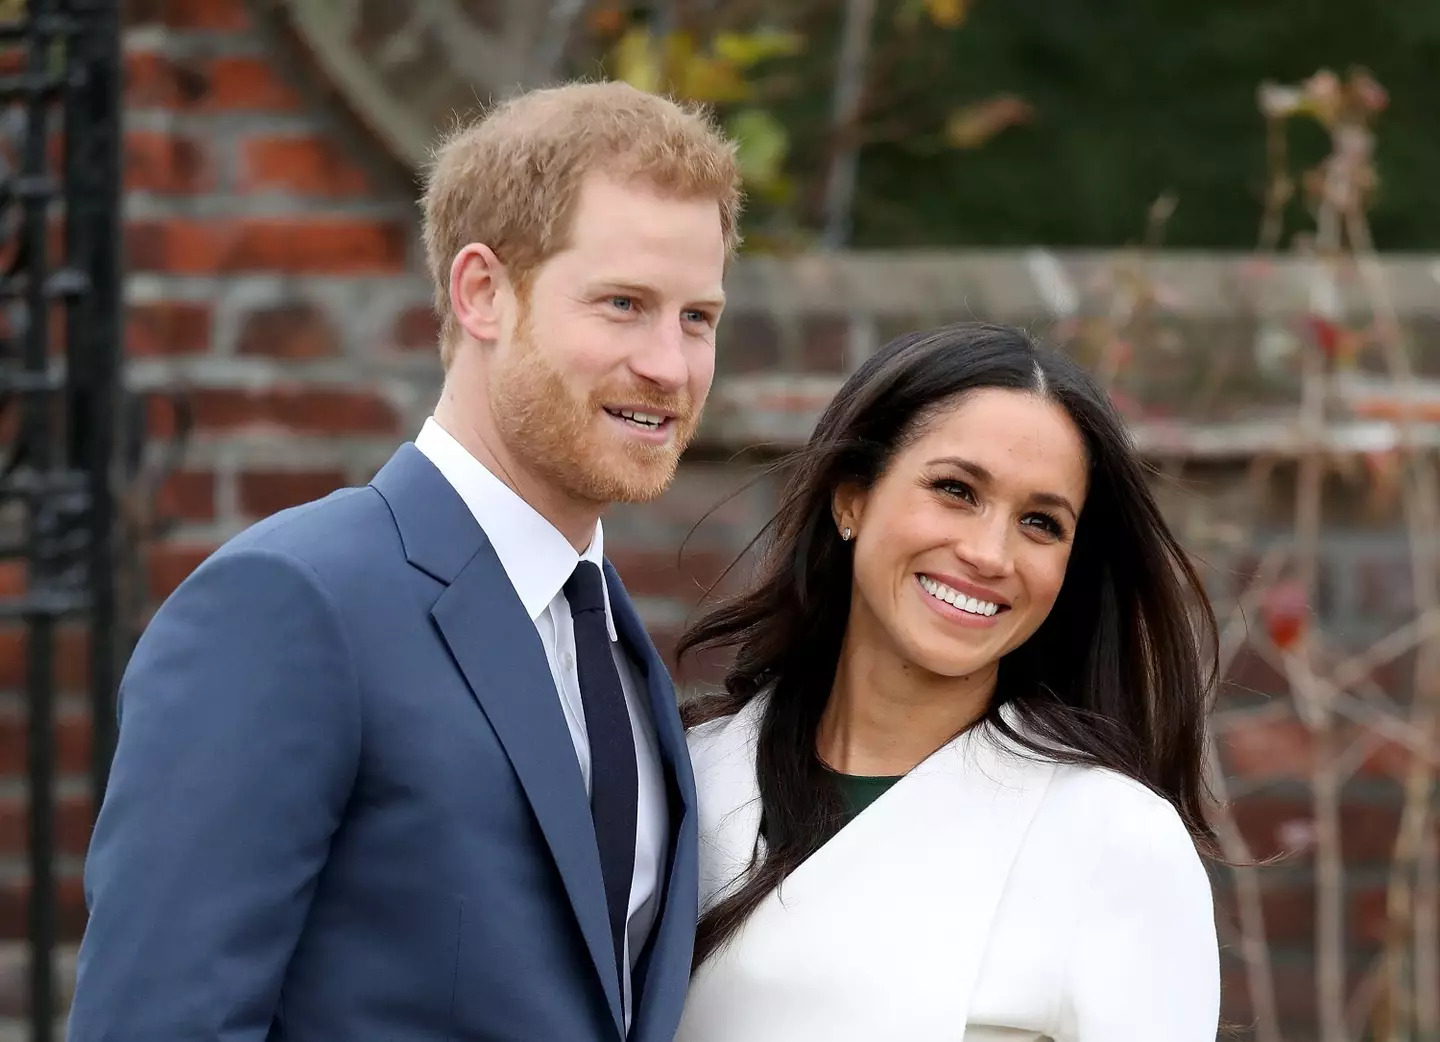 Harry and Meghan (mainly Meghan) have often been the target of Morgan's comments.